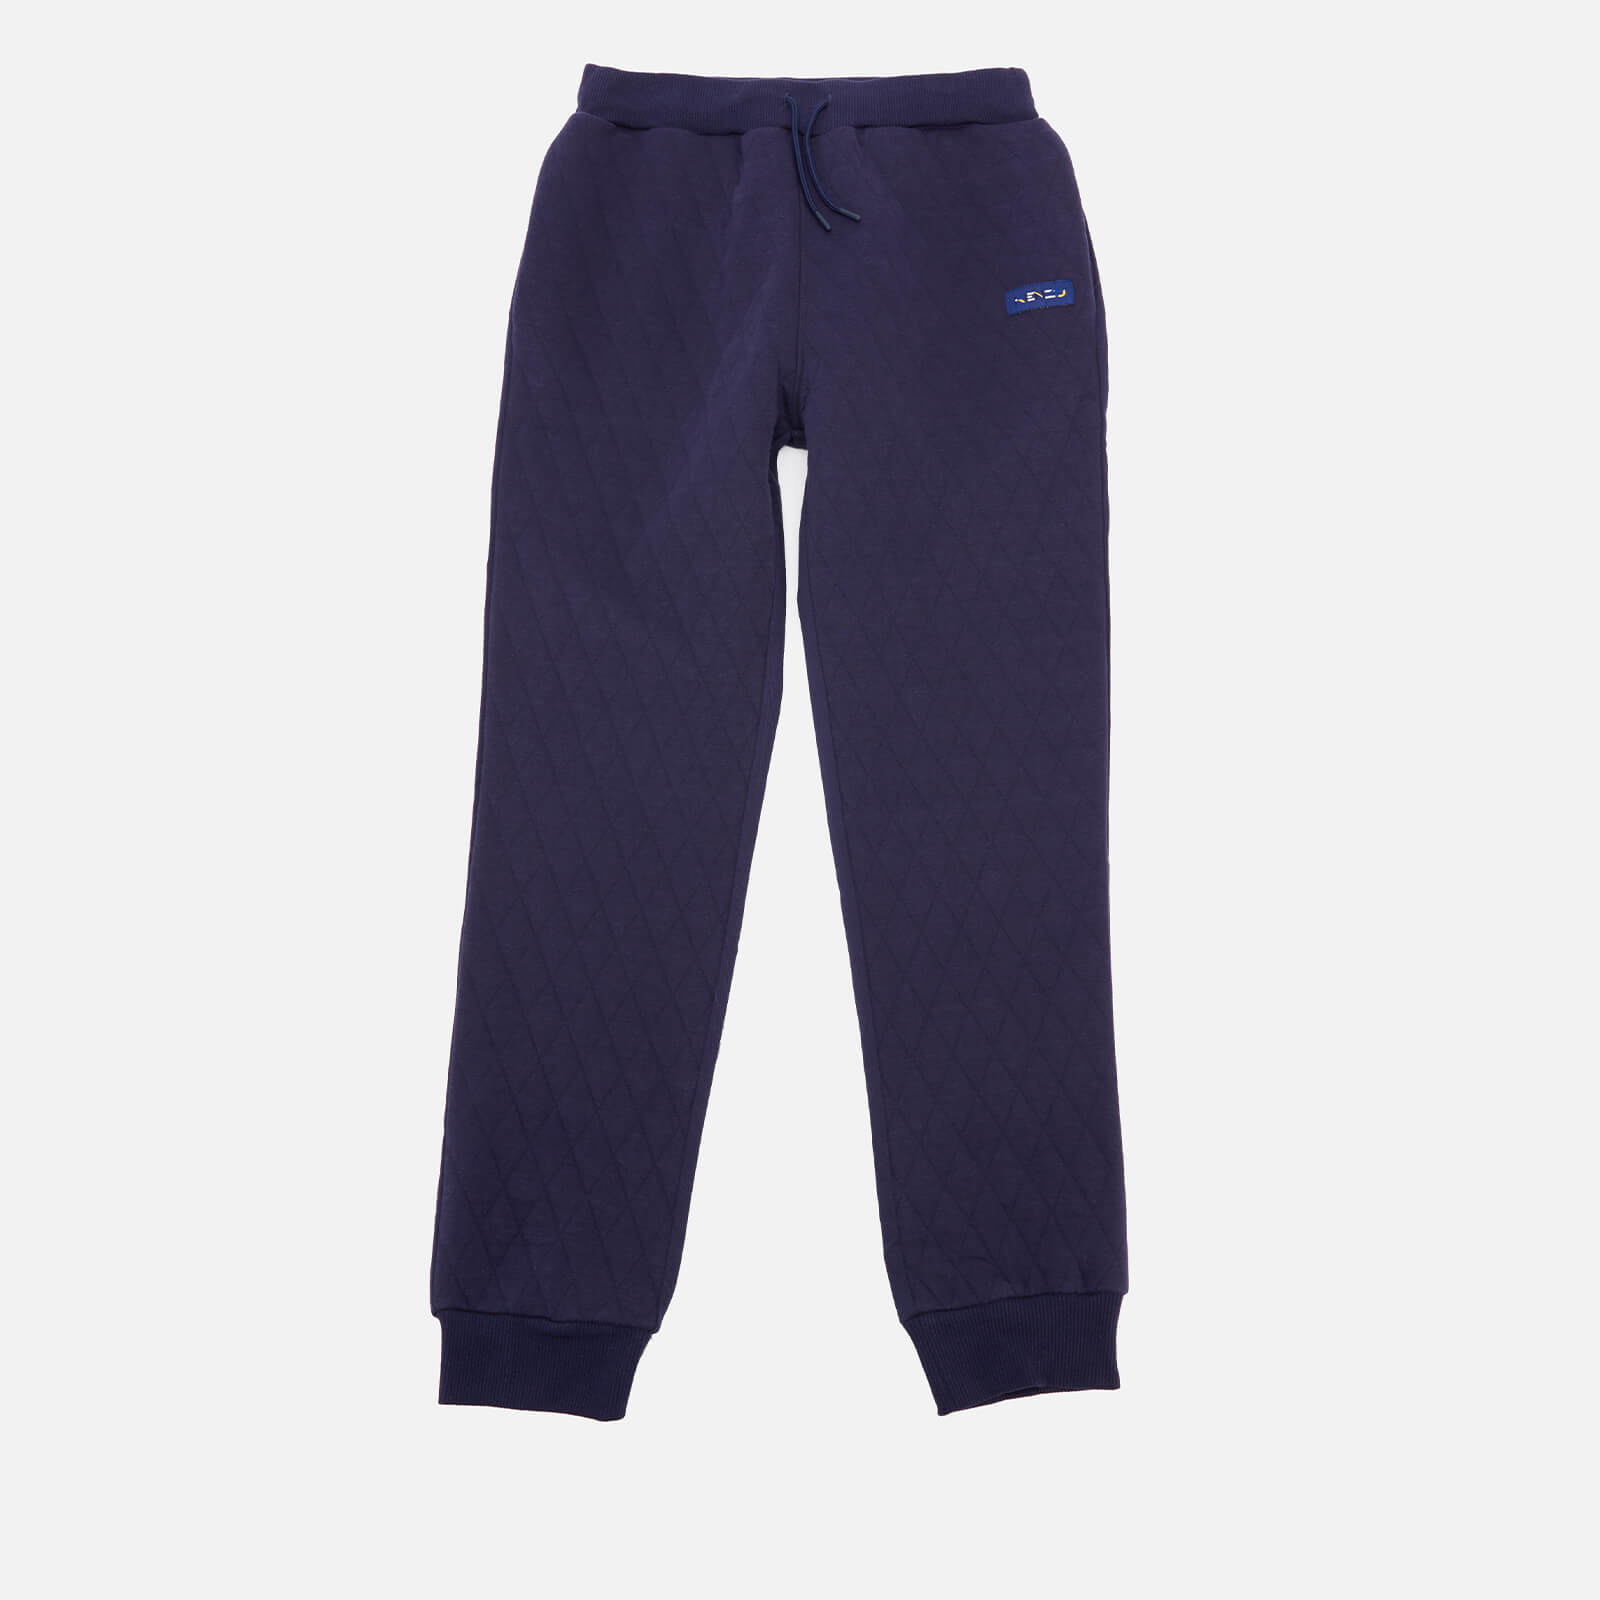 KENZO Boys' Jogging Bottoms - Electric Blue - 4 Years